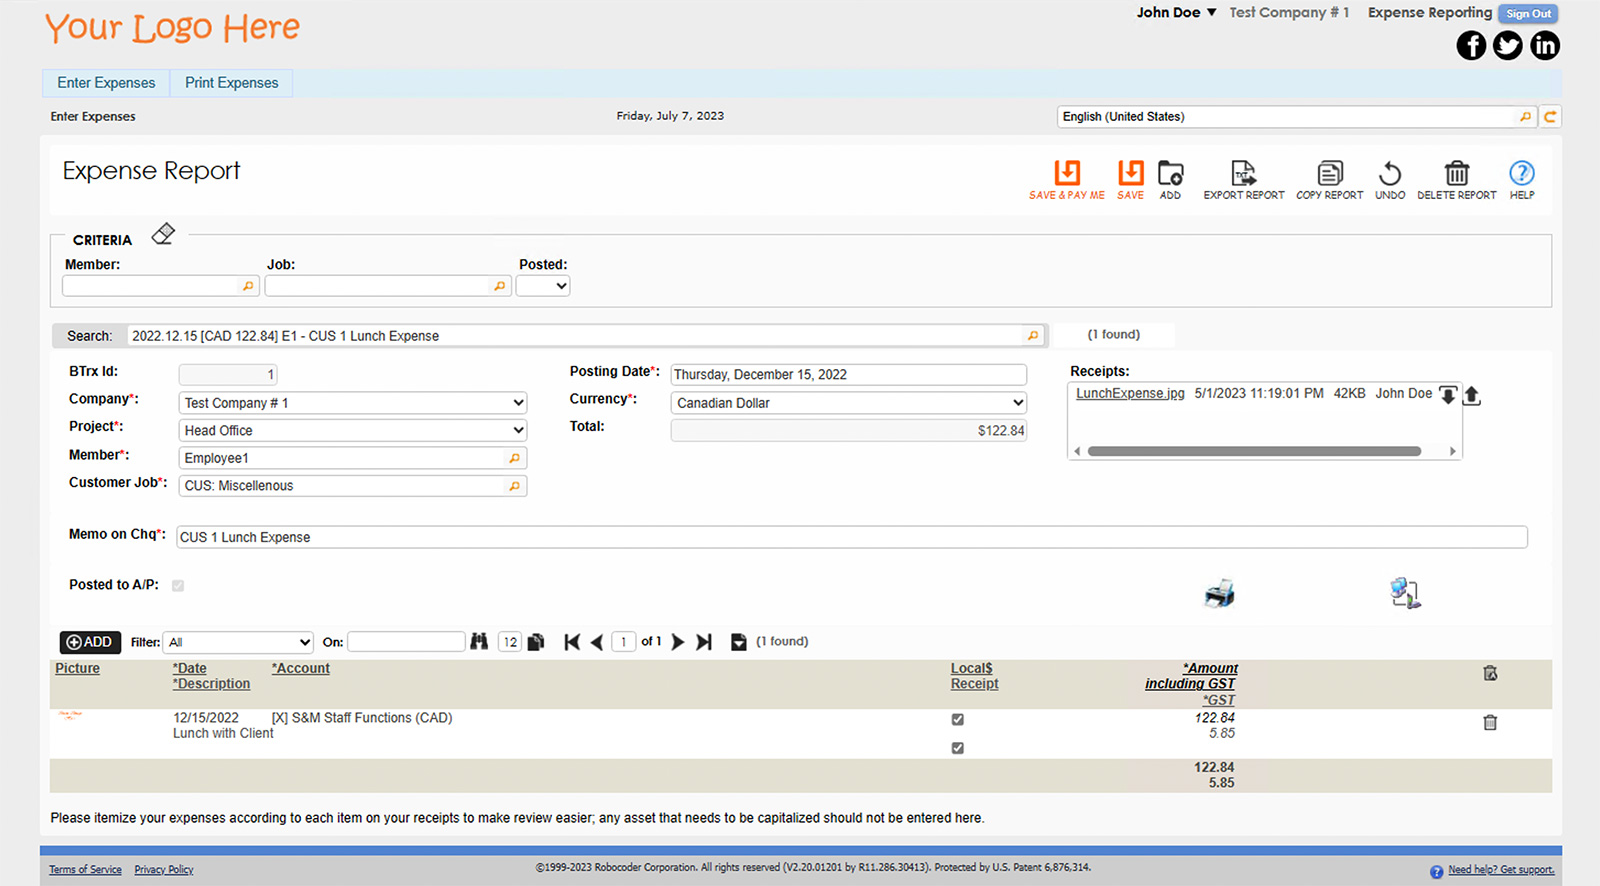 Expense Report in 1ERP's Expense Reporting Module